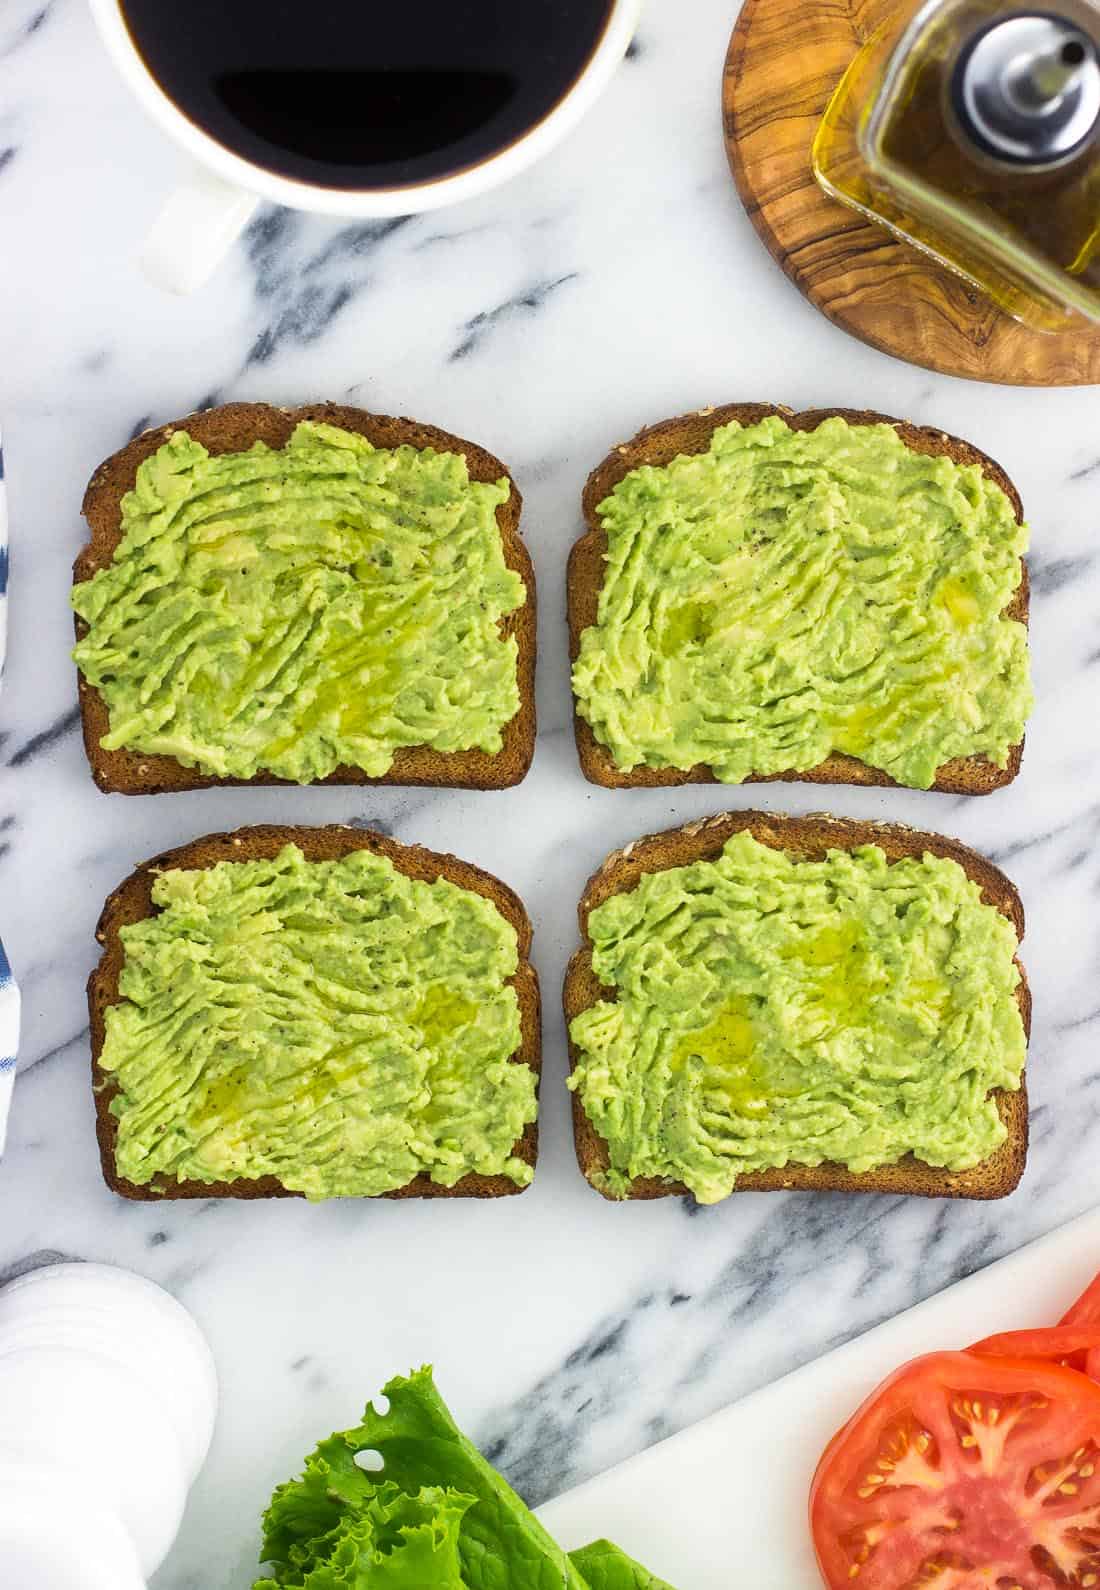 Four slices of avocado toast before adding toppings.